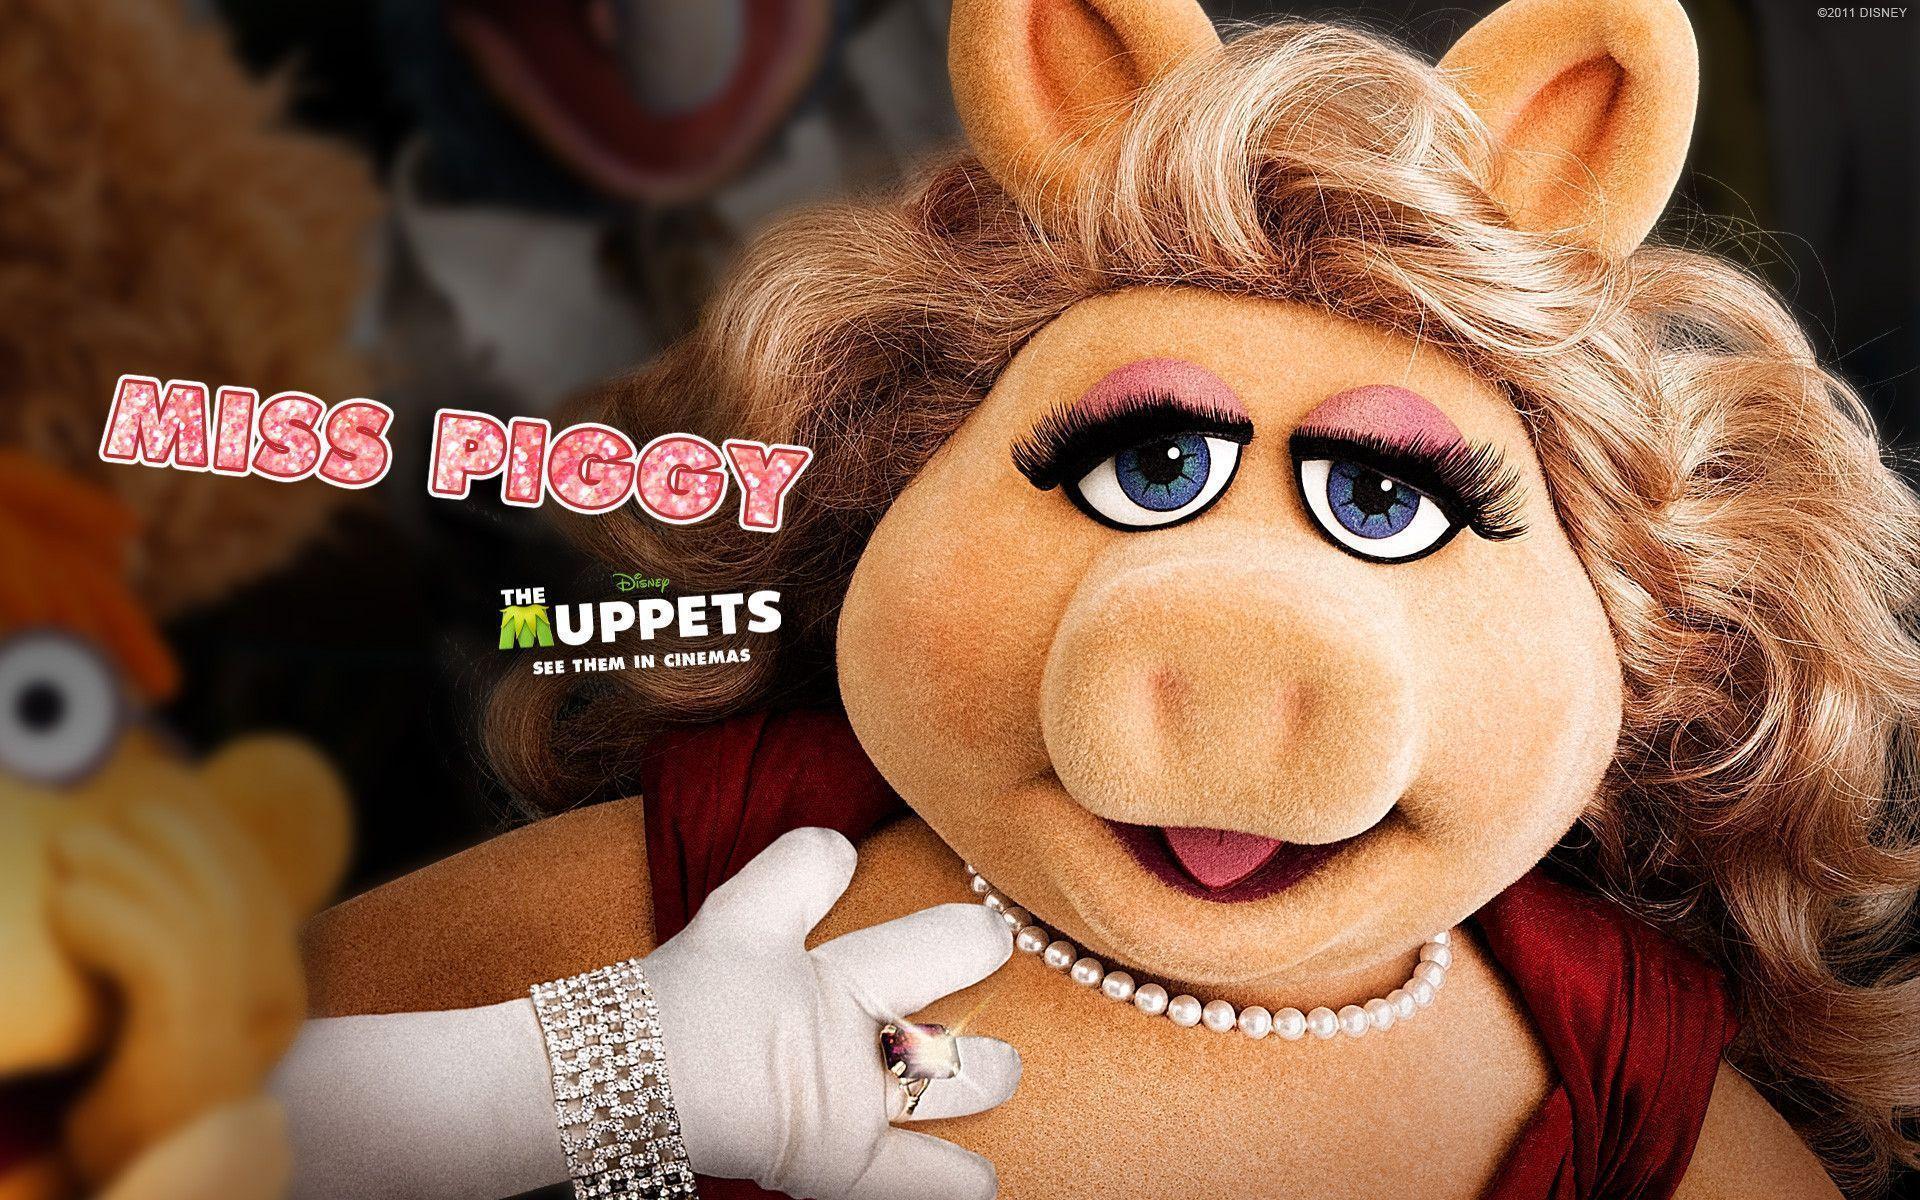 Missy Piggy. The Muppets Characters. Disney Muppets UK